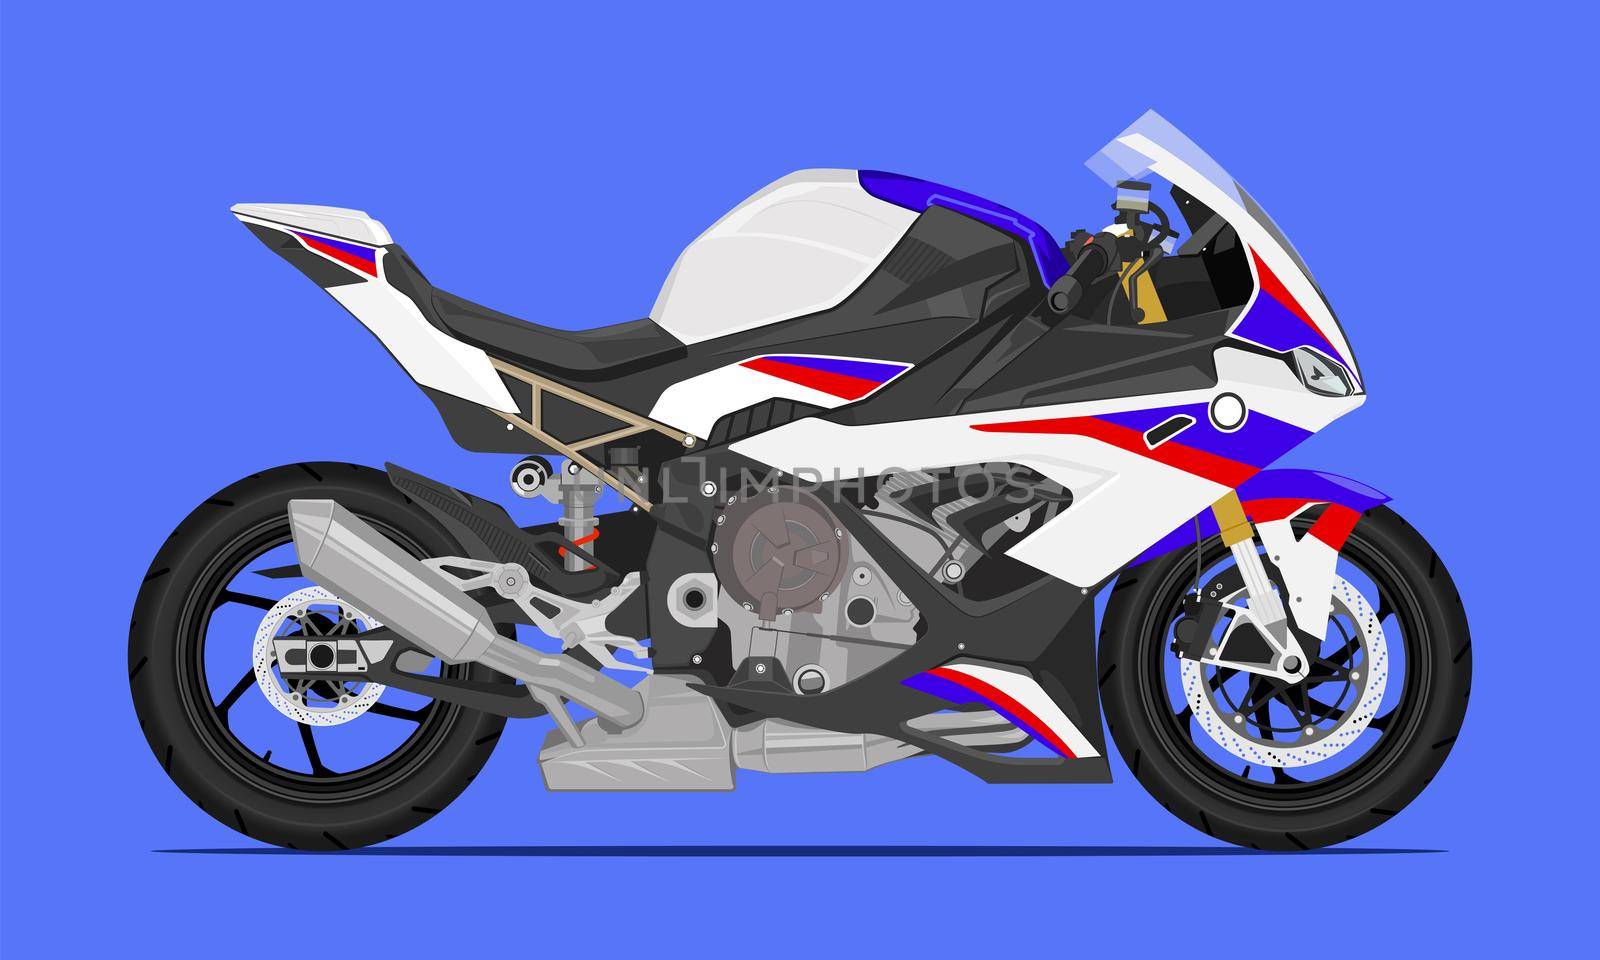 big bike sport motorcycle fast speed modern style white blue red color. vector illustration eps10